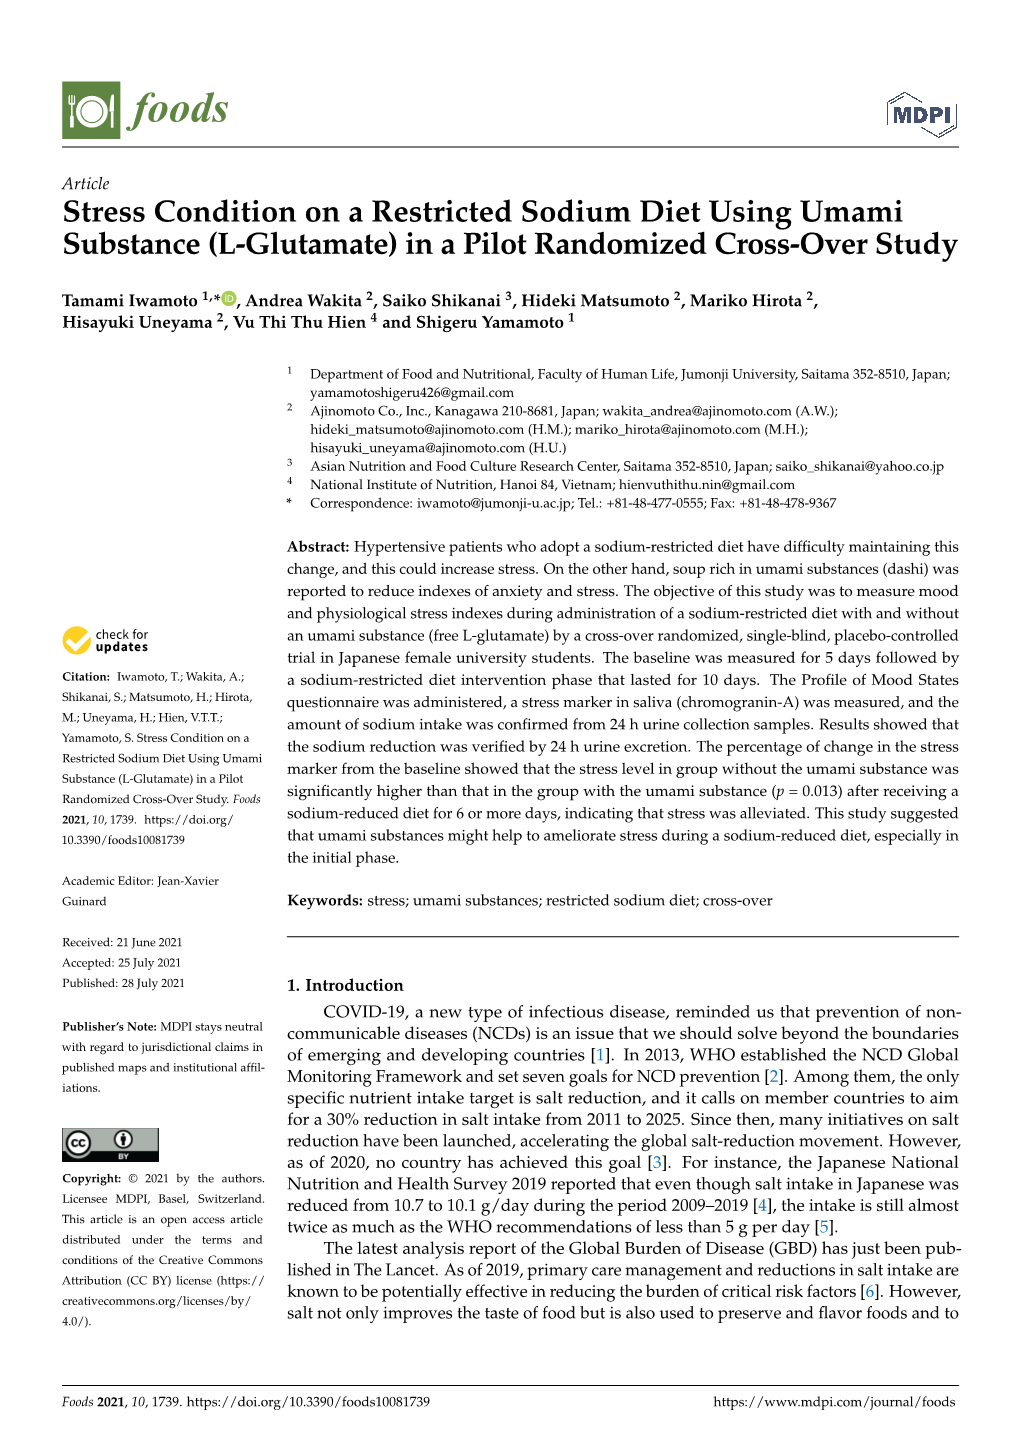 Stress Condition on a Restricted Sodium Diet Using Umami Substance (L-Glutamate) in a Pilot Randomized Cross-Over Study